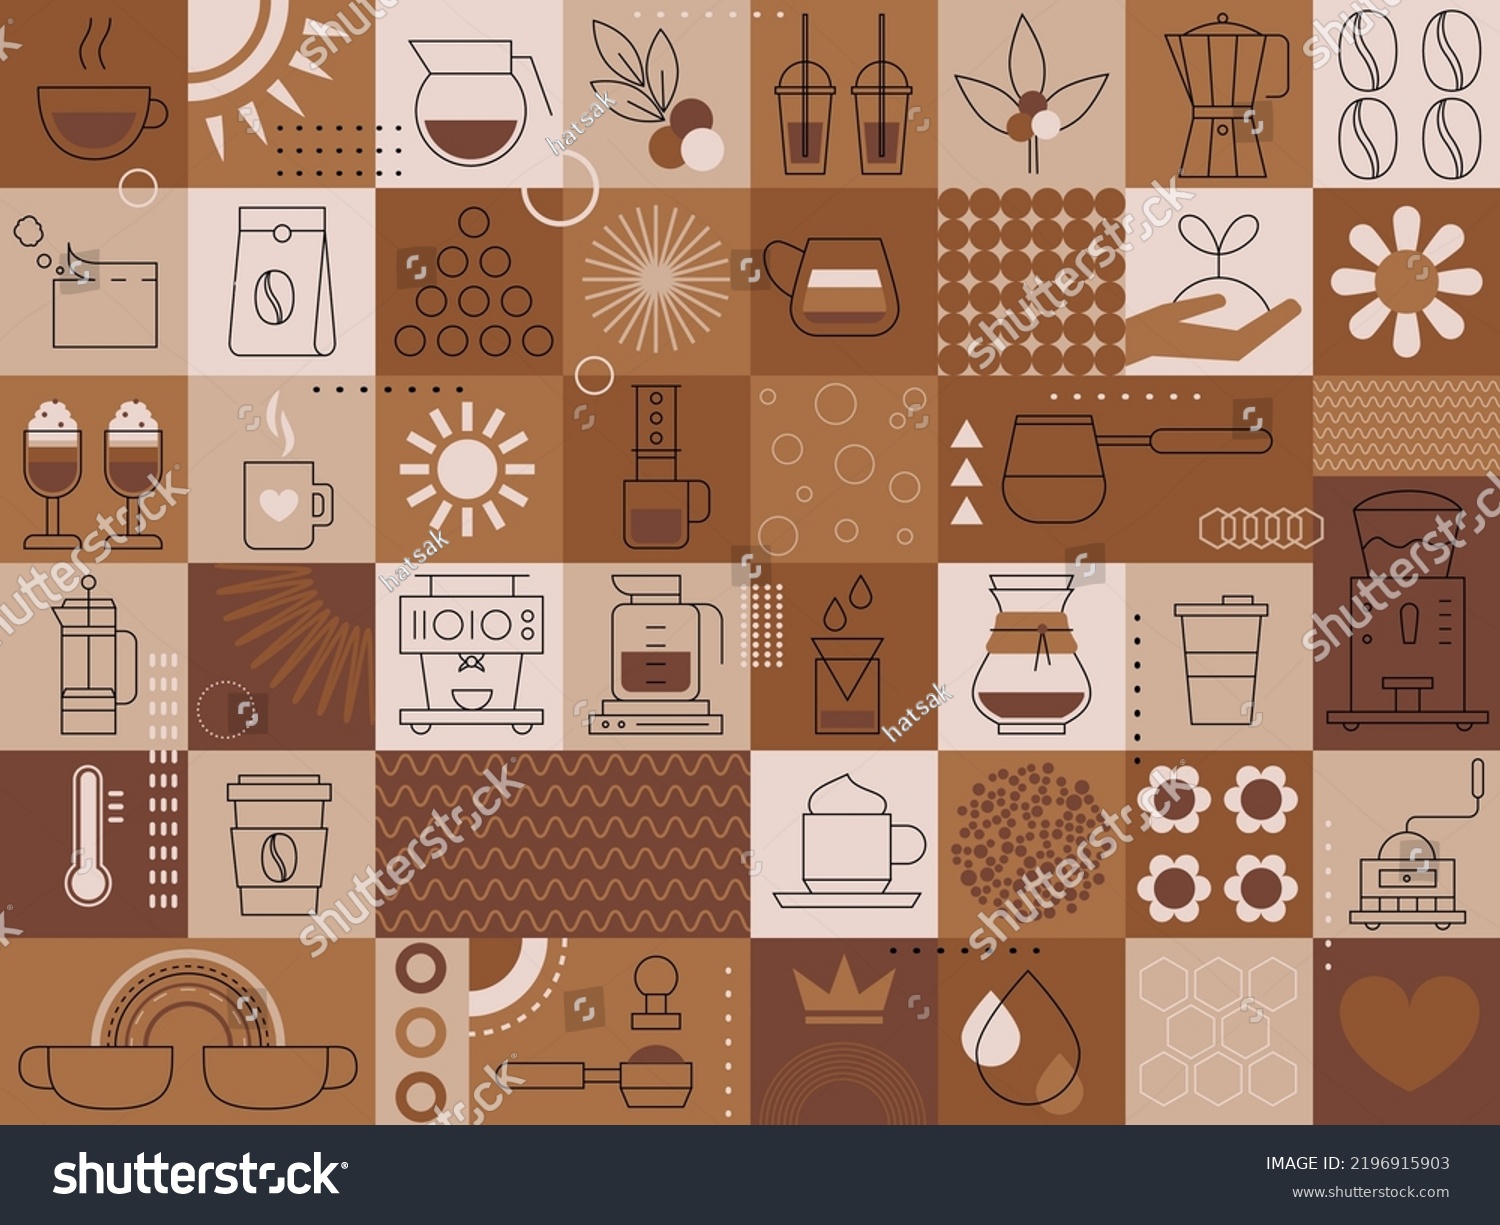 SVG of Coffee background. Set of coffee signs, icons, symbols for menu design. Cappuccino, americano, espresso, mocha, latte. Various coffee drinks set. Cups, beans and coffee makers. Broun design svg